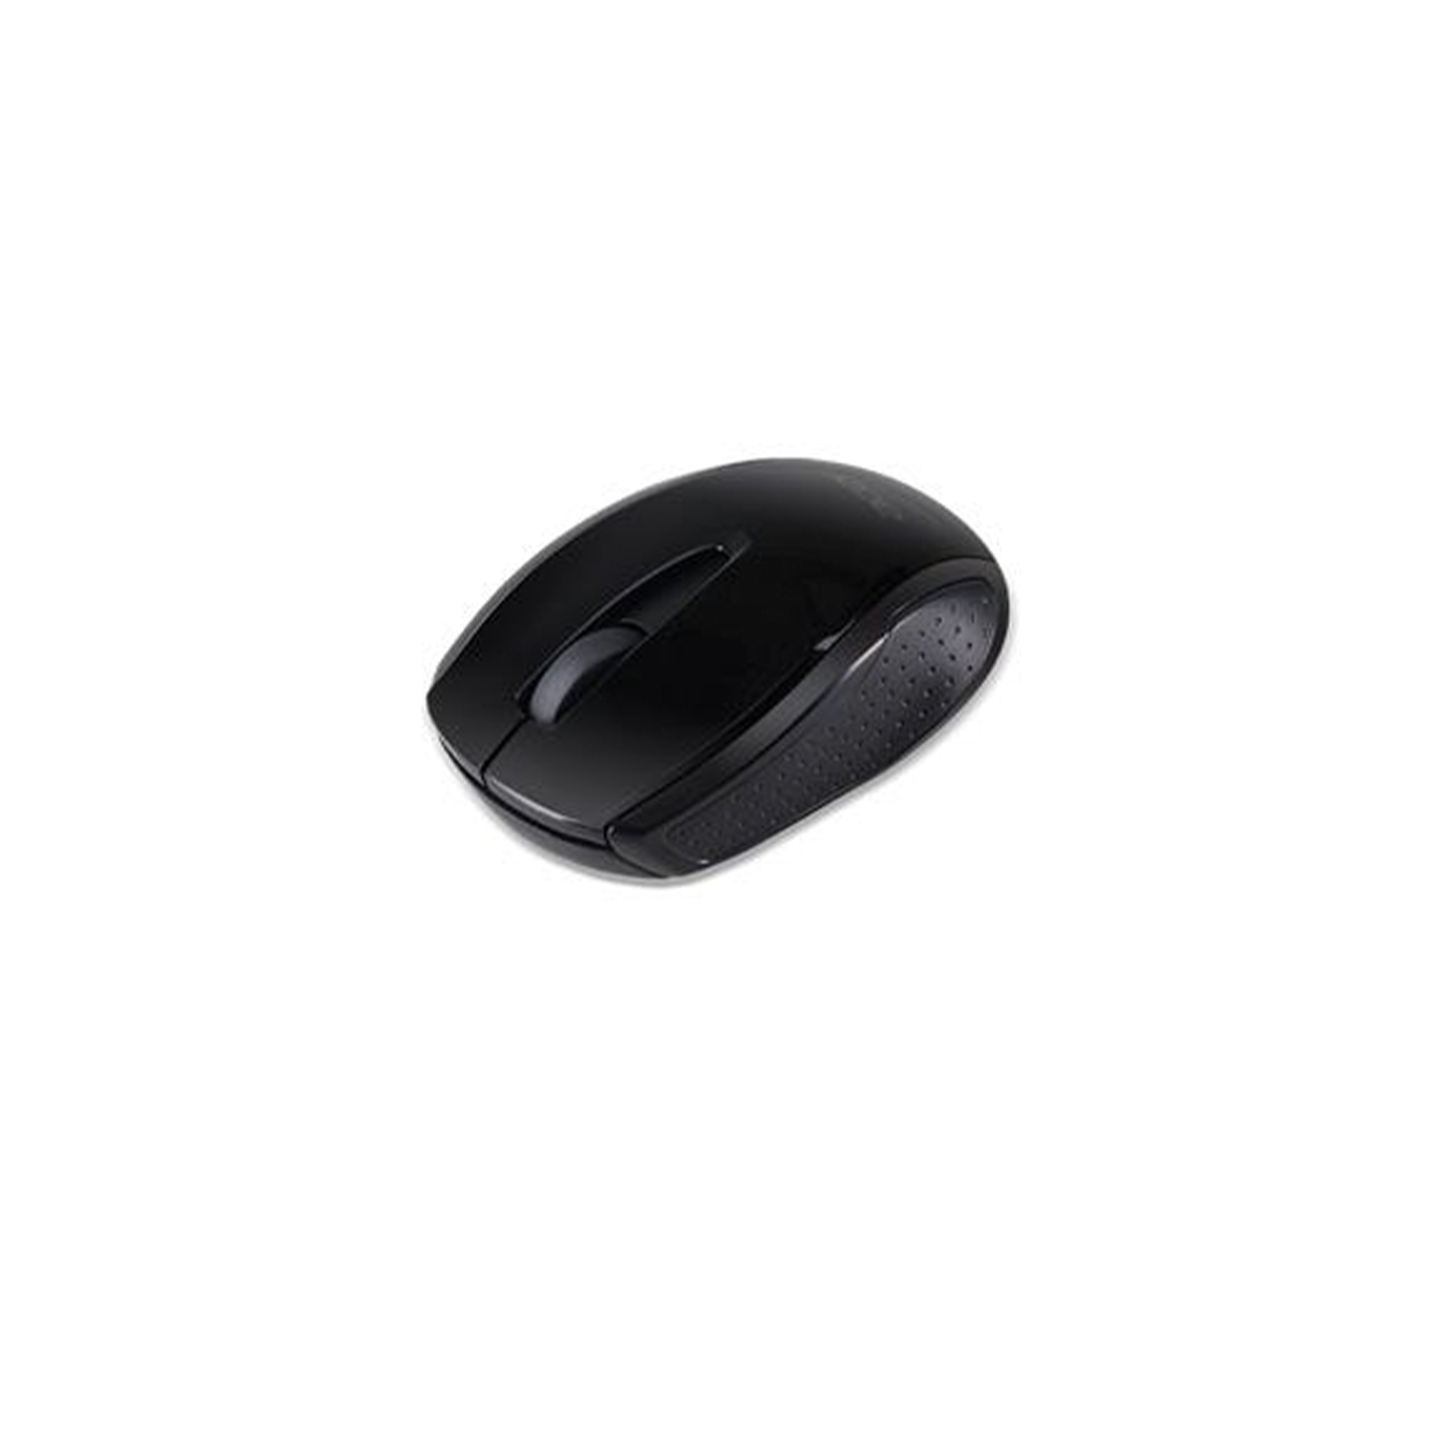 Acer Wireless Optical Mouse